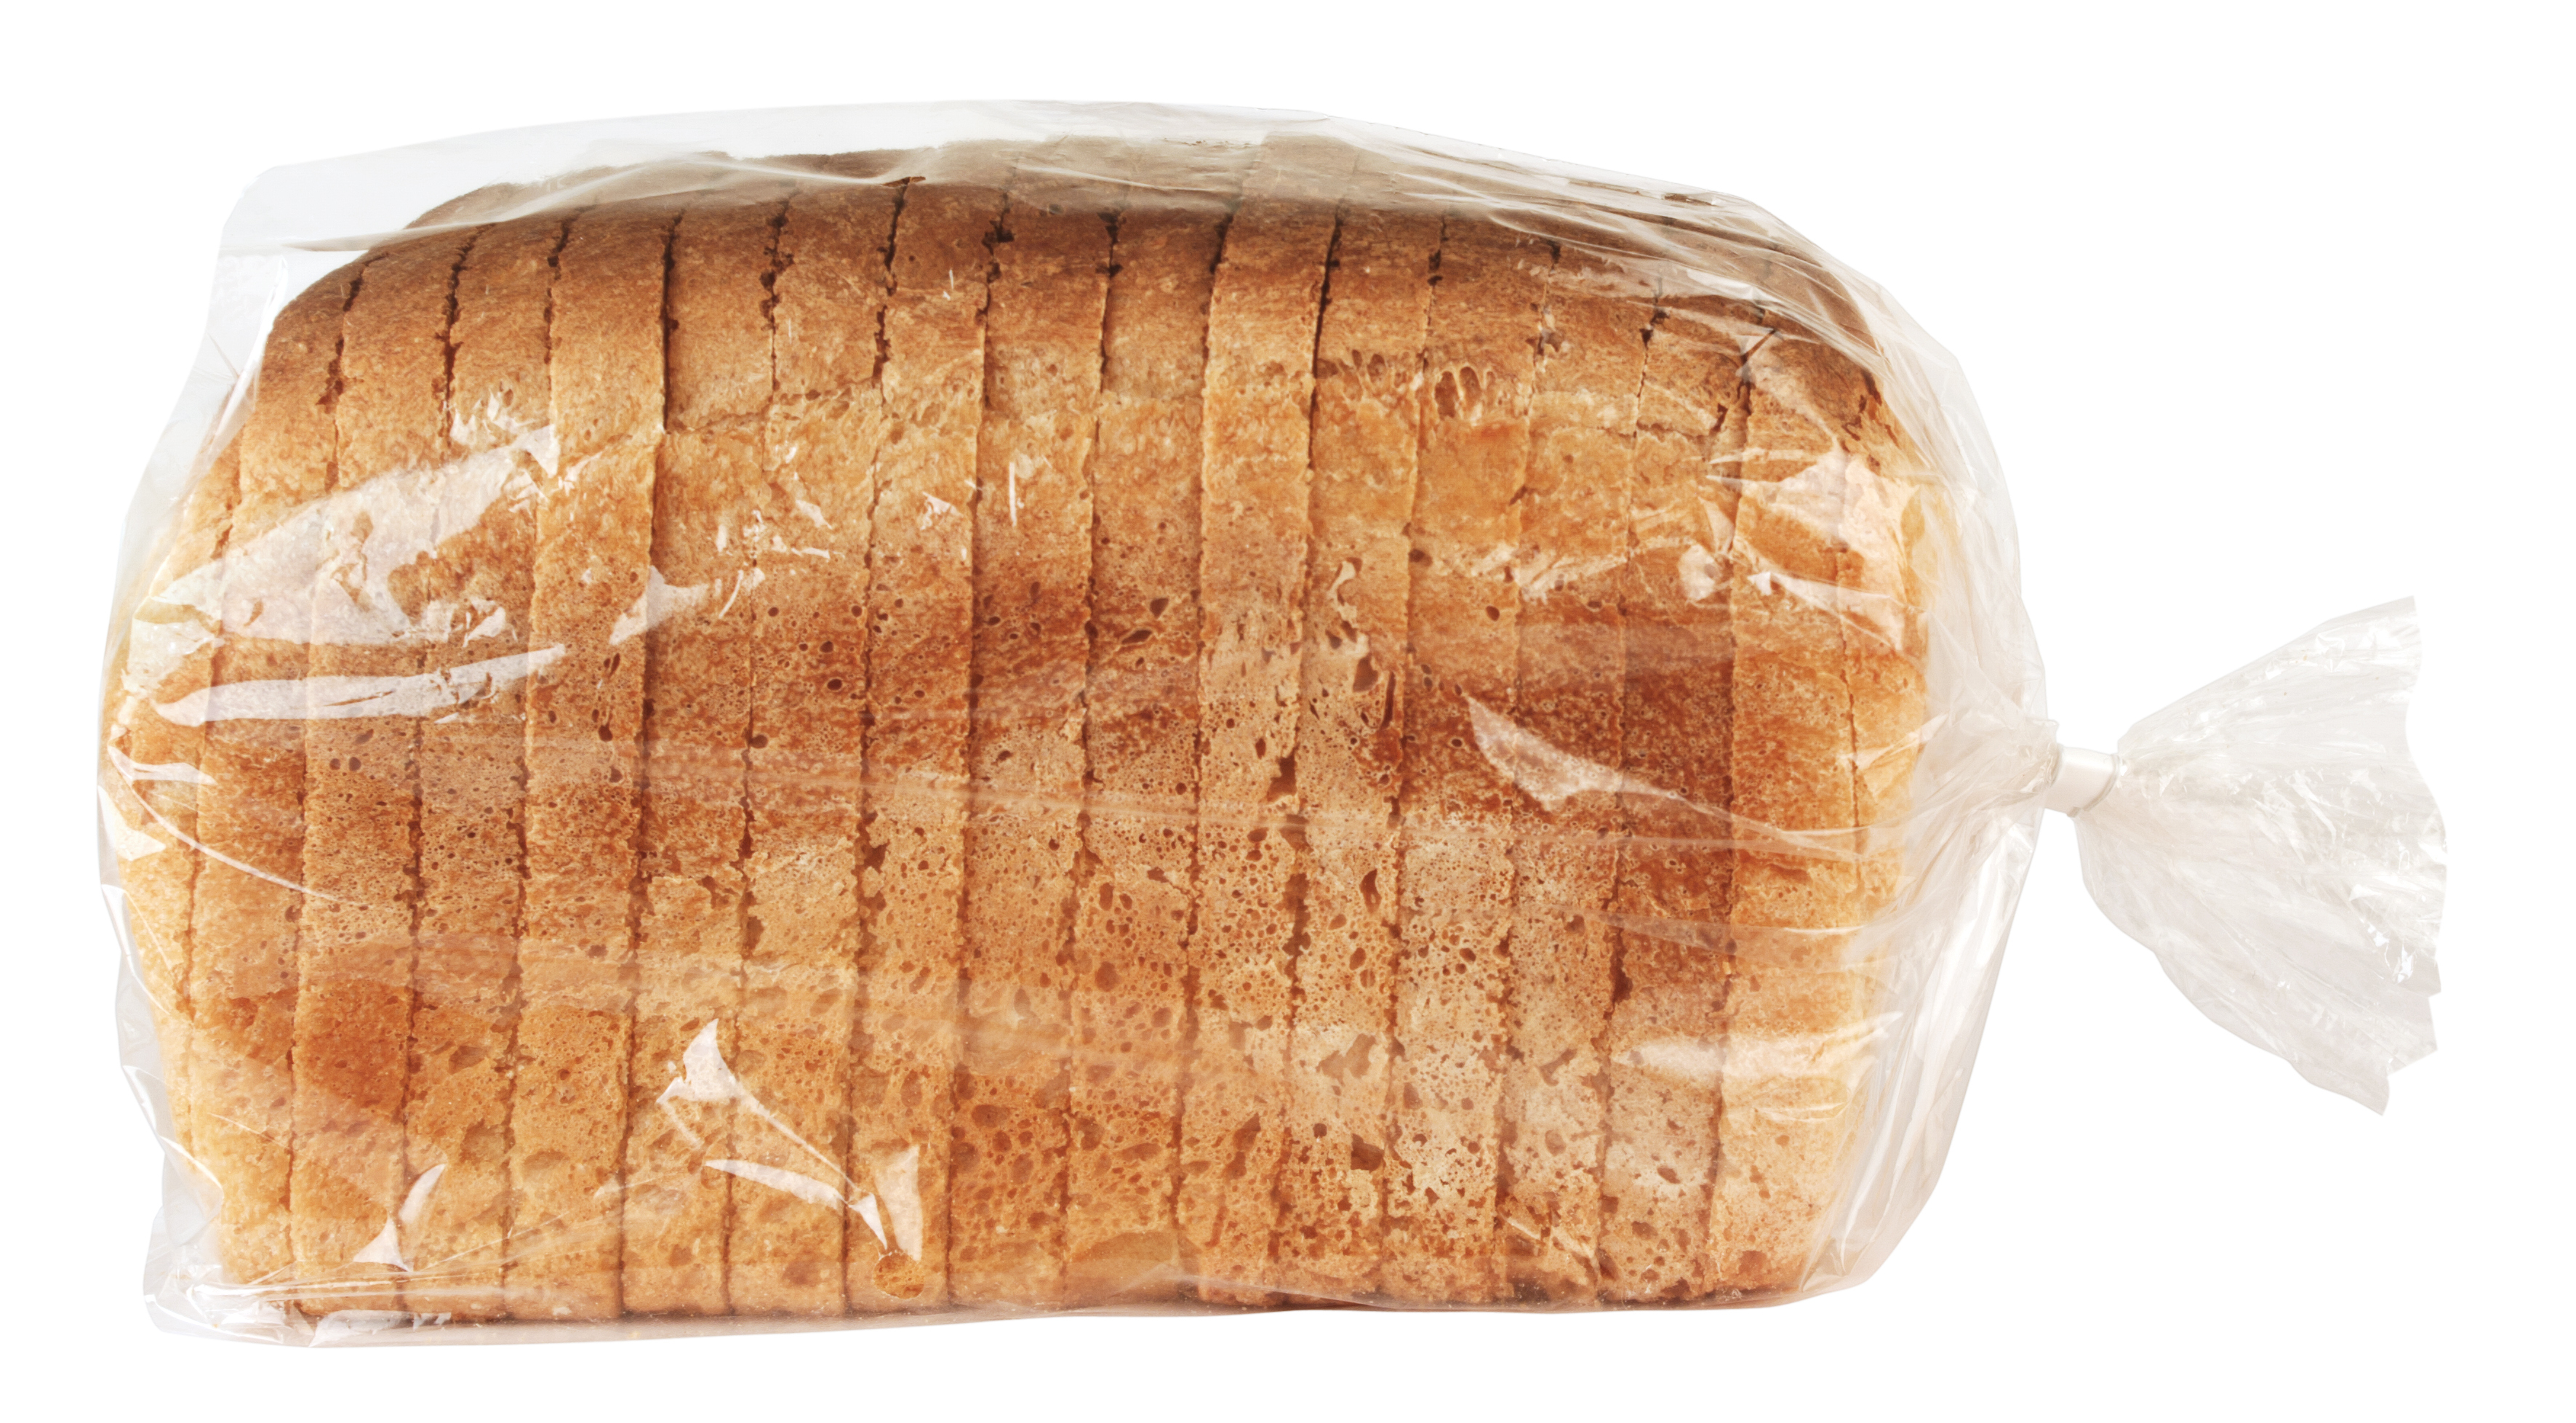 Shop-bought bread is among the most commonly eaten ultra-processed foods 